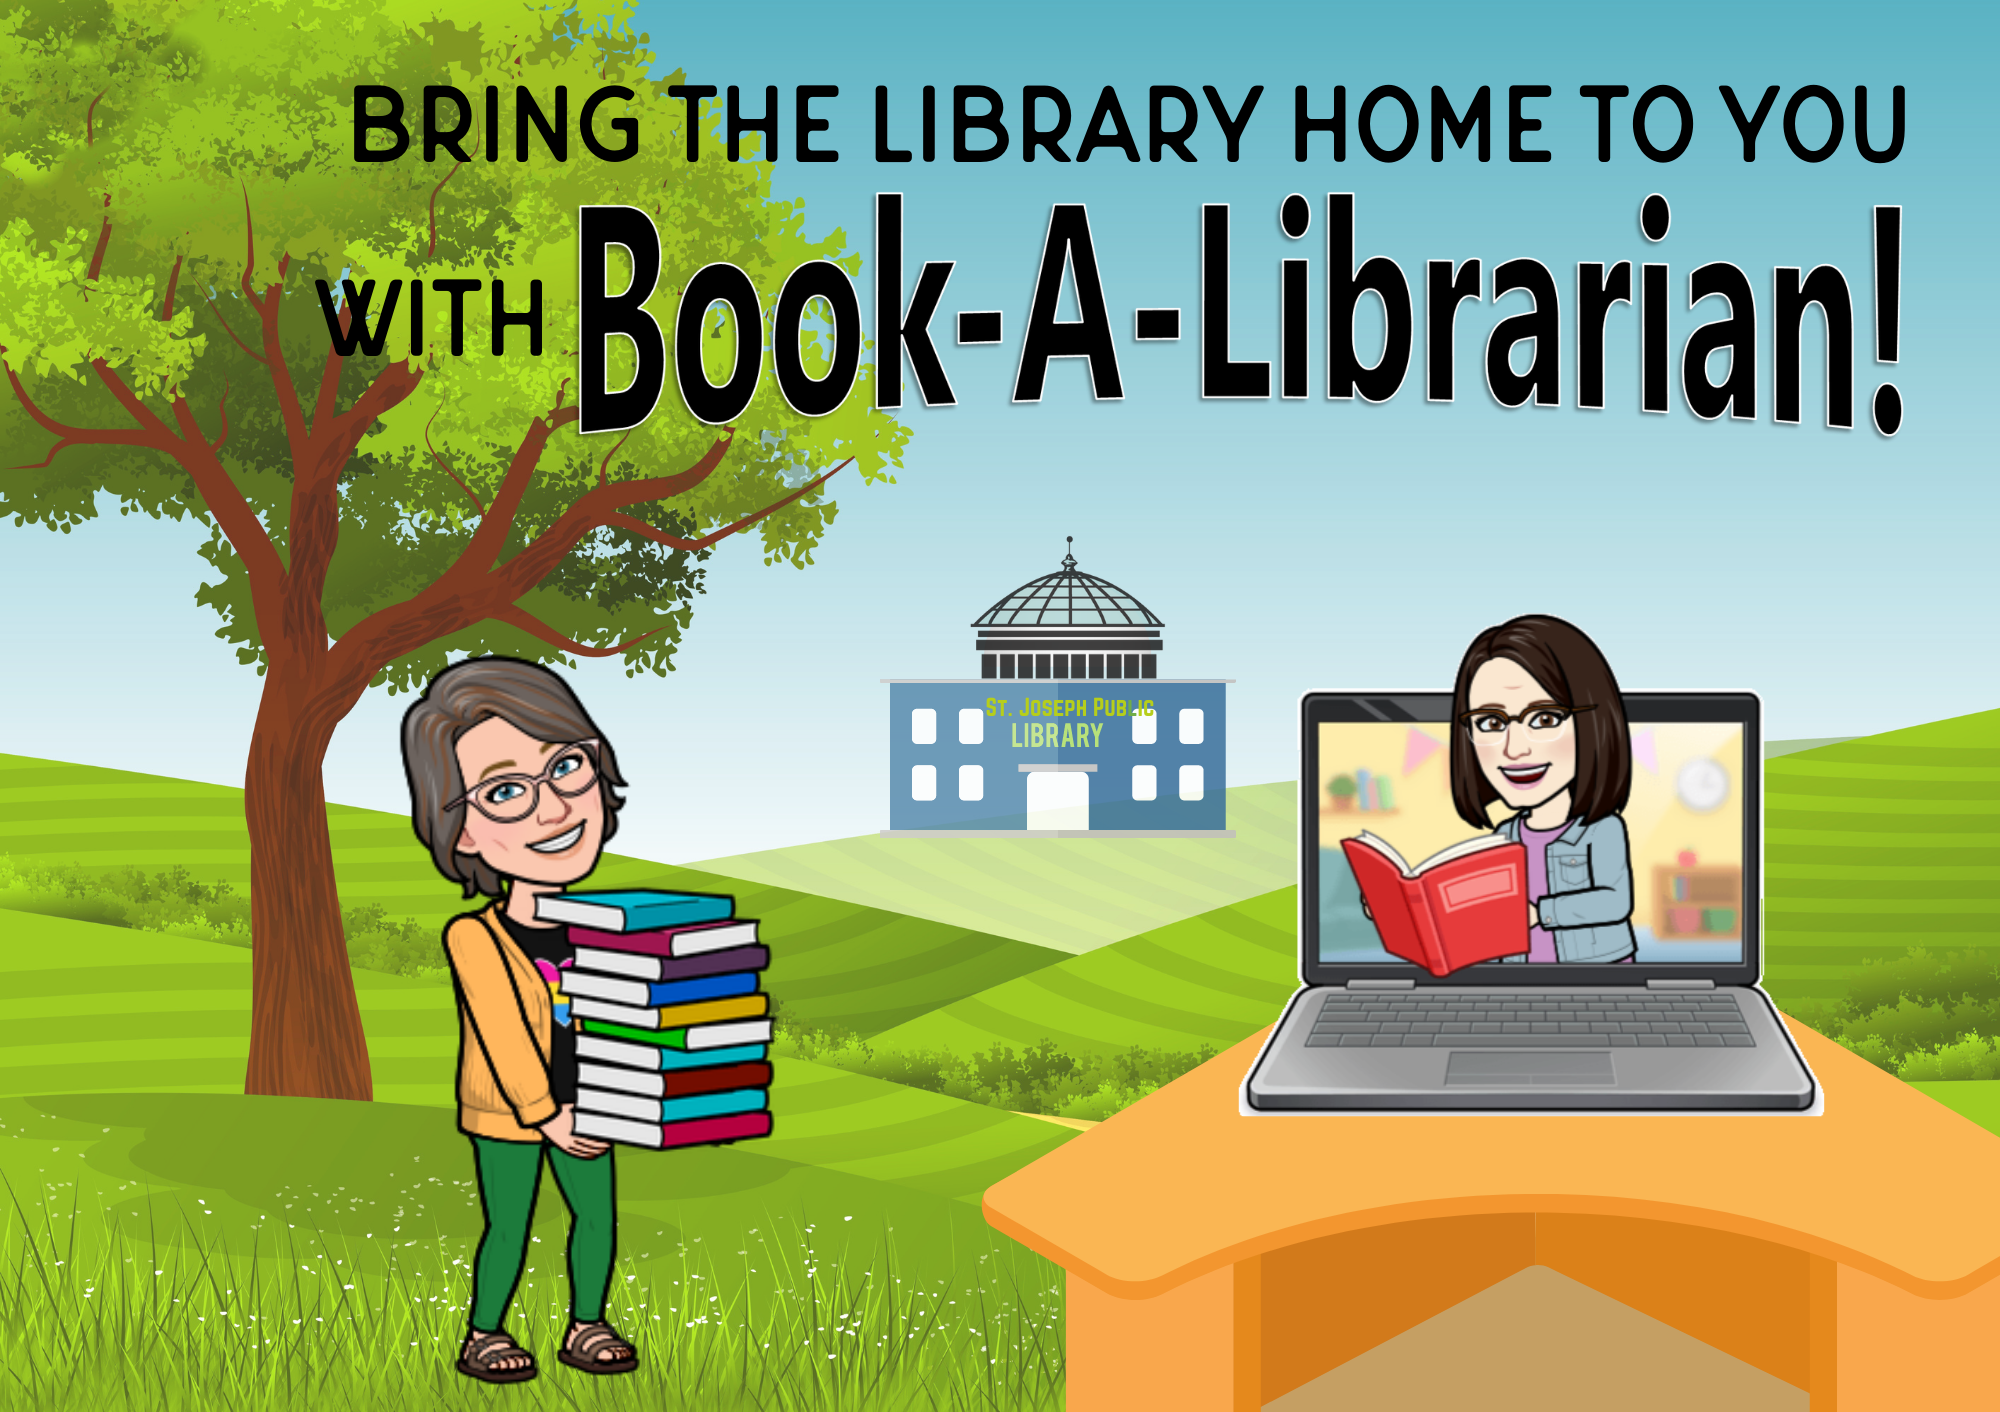 Bring the library home to you with Book A Librarian!